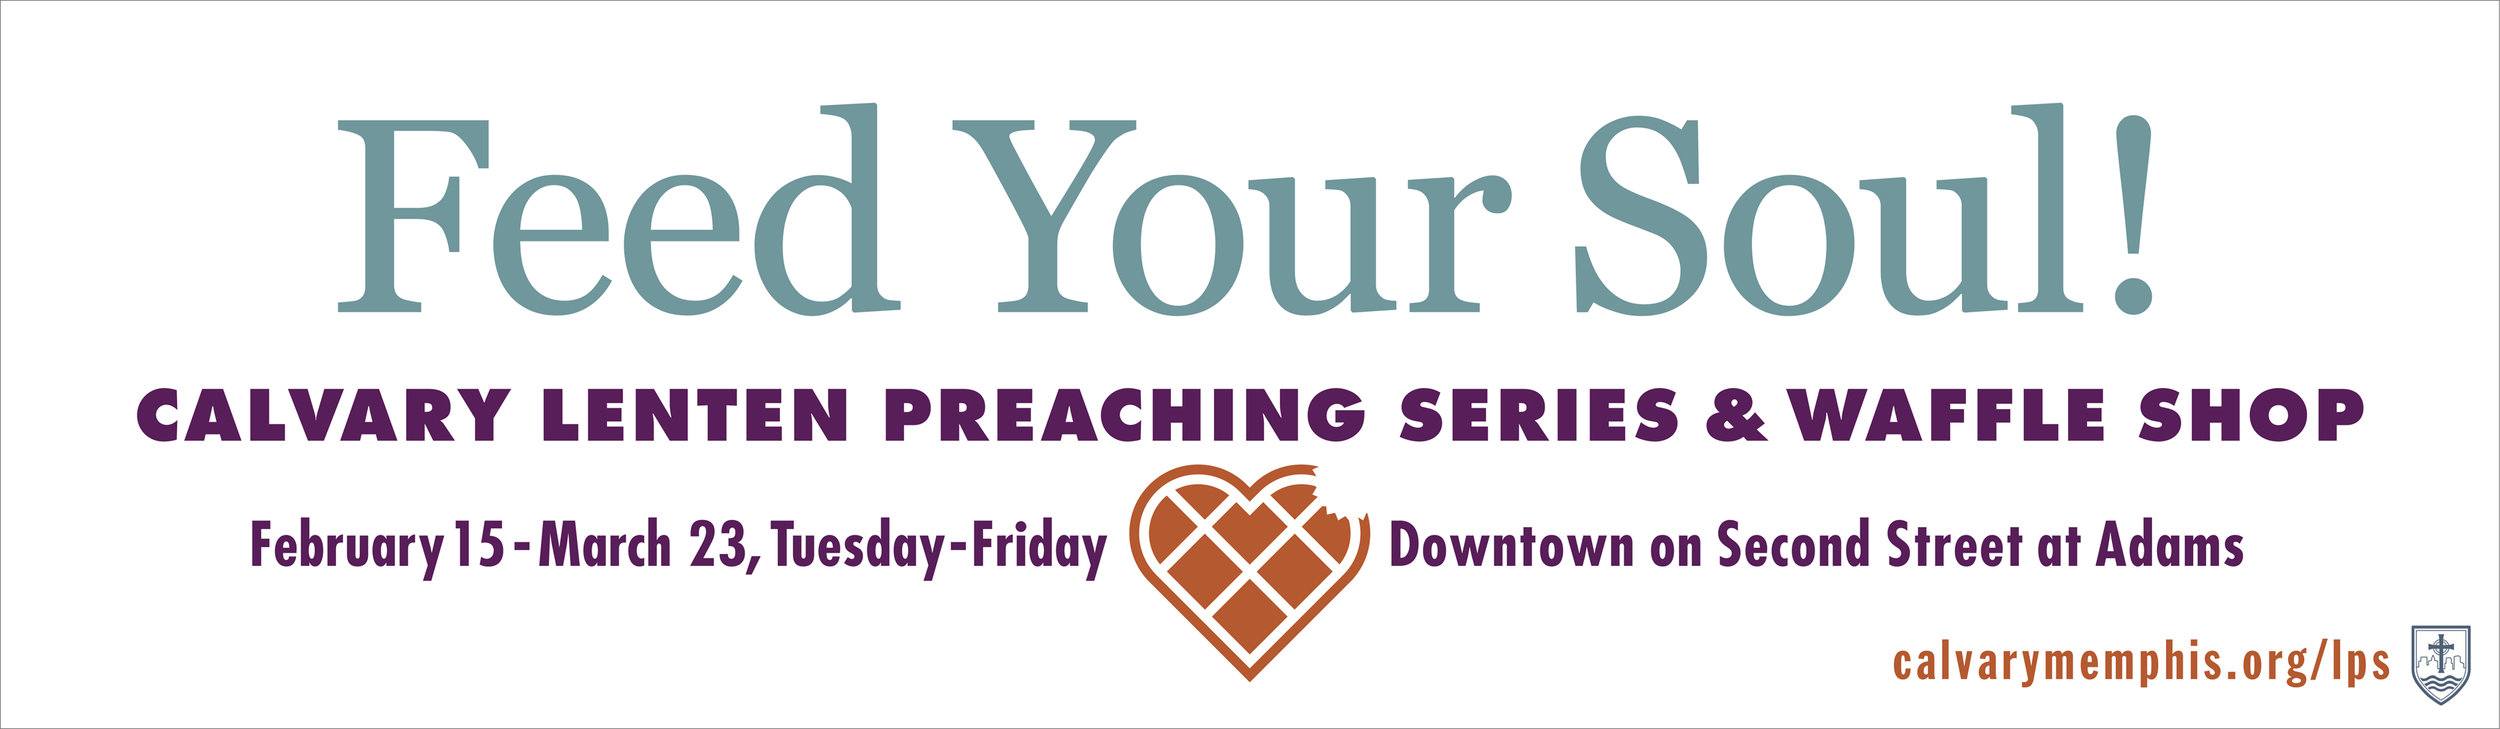  Calvary Lenten Feed Your Soul Outdoor bulletin and digital 2018  Creative, copywriting and design by Chuck Mitchell 